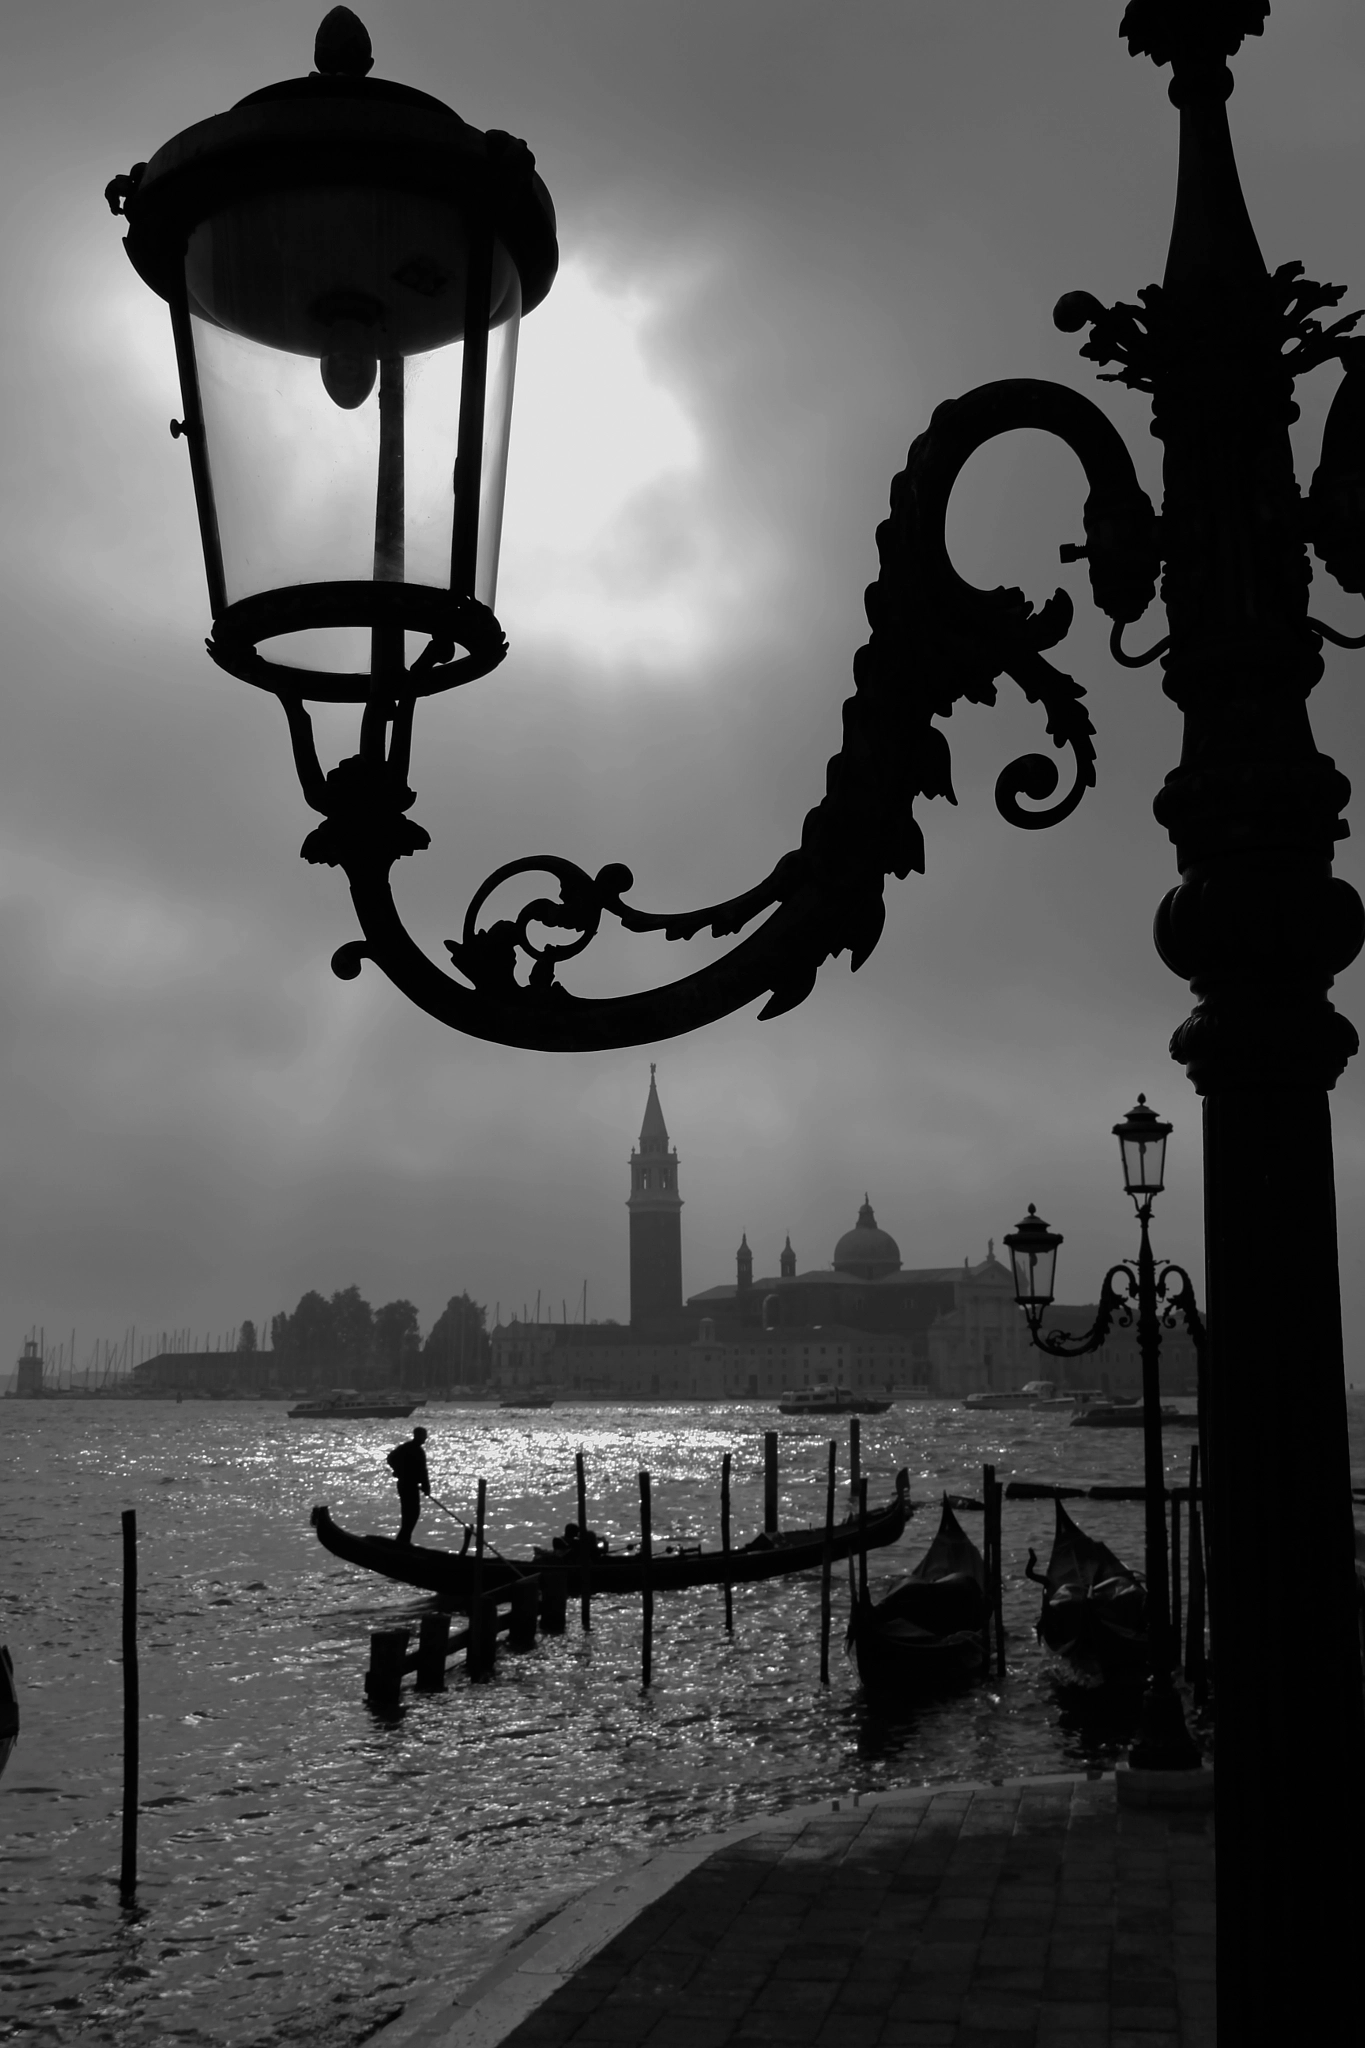 Gondola Silhouette, Venice. by Neil Hargreaves - Photo 26850365 / 500px